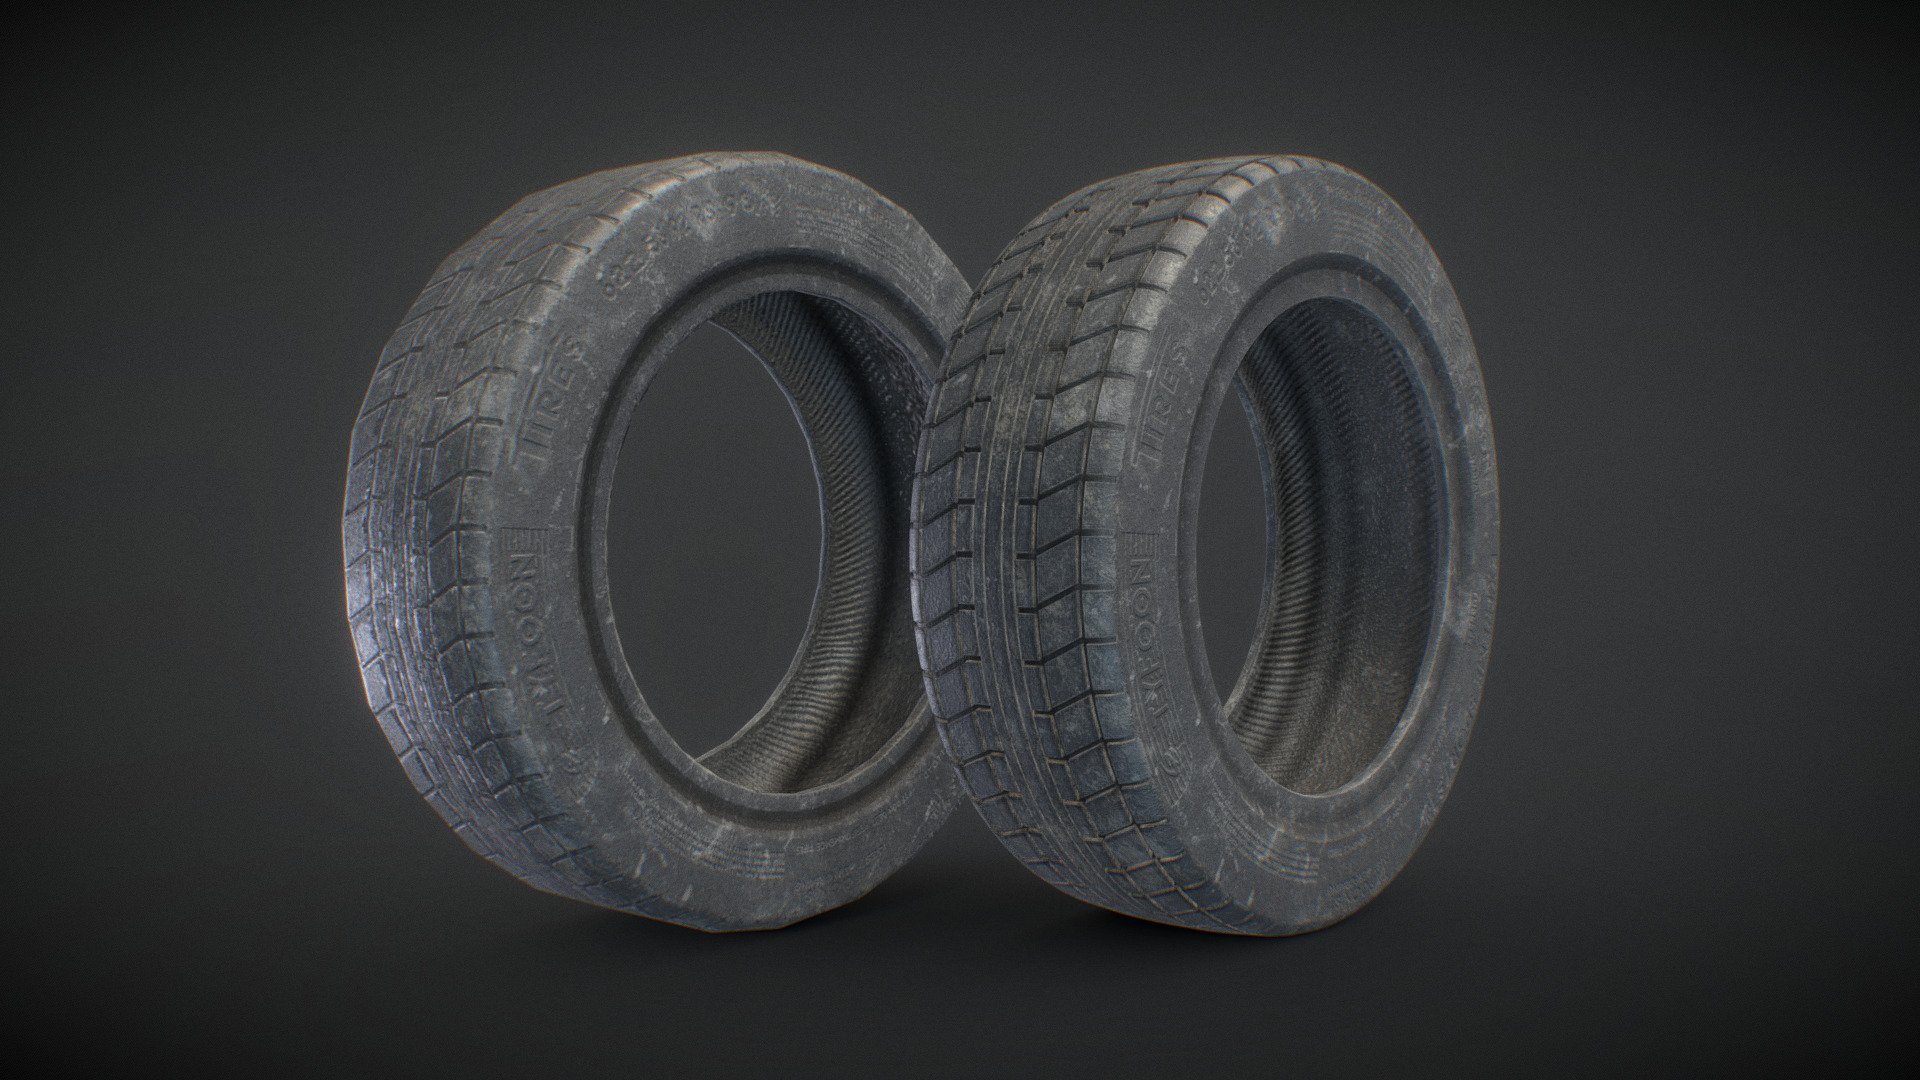 Used tire made for real time and offline rendering. (High poly and low poly)
Logo's and text on the tire are made up so you can use it without worrying about copyright claims etc.

Download the attached additional file for the easiest and fast download.

Download file includes:
* Low poly mesh (has a Lightmap UV) with 512p and 1024p textures for Unreal Engine and Unity (+ DirectX and OpenGL) + LOD's for Unreal Engine.
* Low poly is already setup for Unreal Engine with LOD's and lightmap so you only have to drop the file in your project.
* High poly mesh for offline rendering and contains 4k textures and 2k textures.

If you have any questions or problems with the model, please leave a comment and it will be fixed and updated 3d model